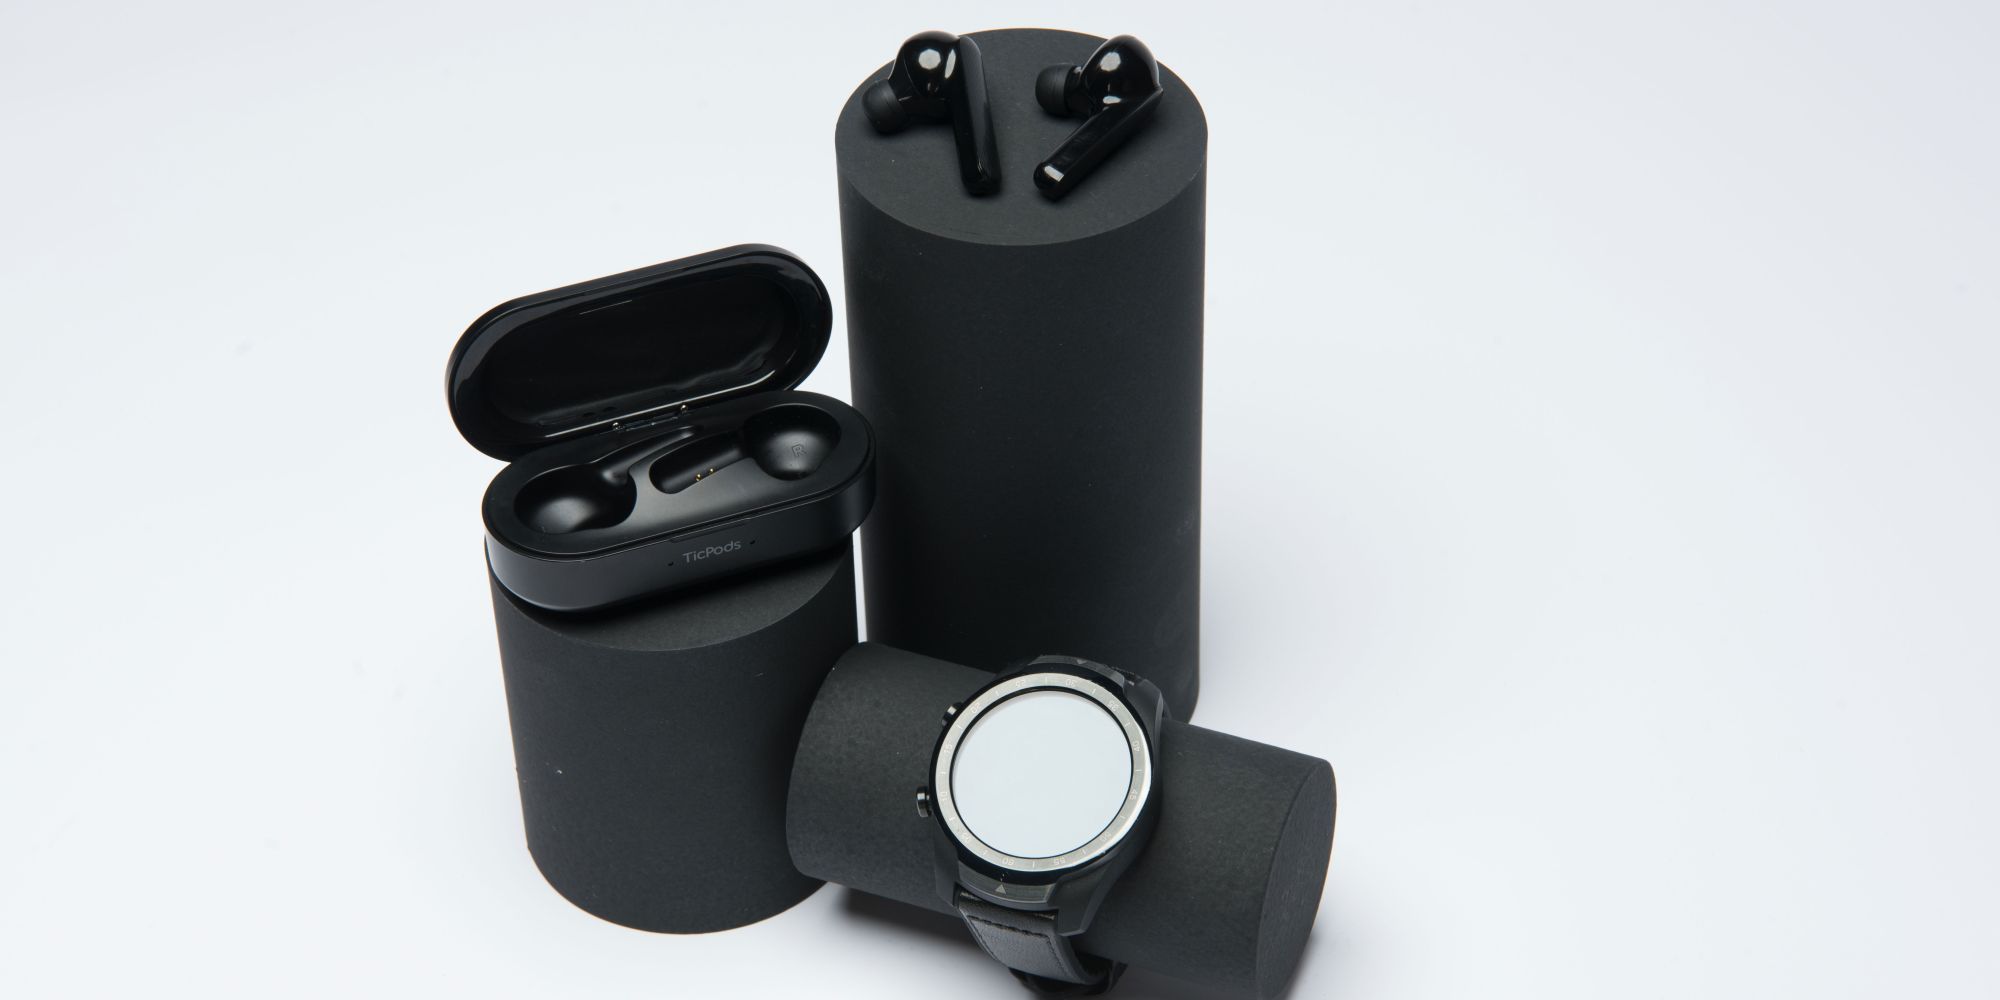 Mobvoi Earbuds Gesture earbuds with case and watch on display posts.